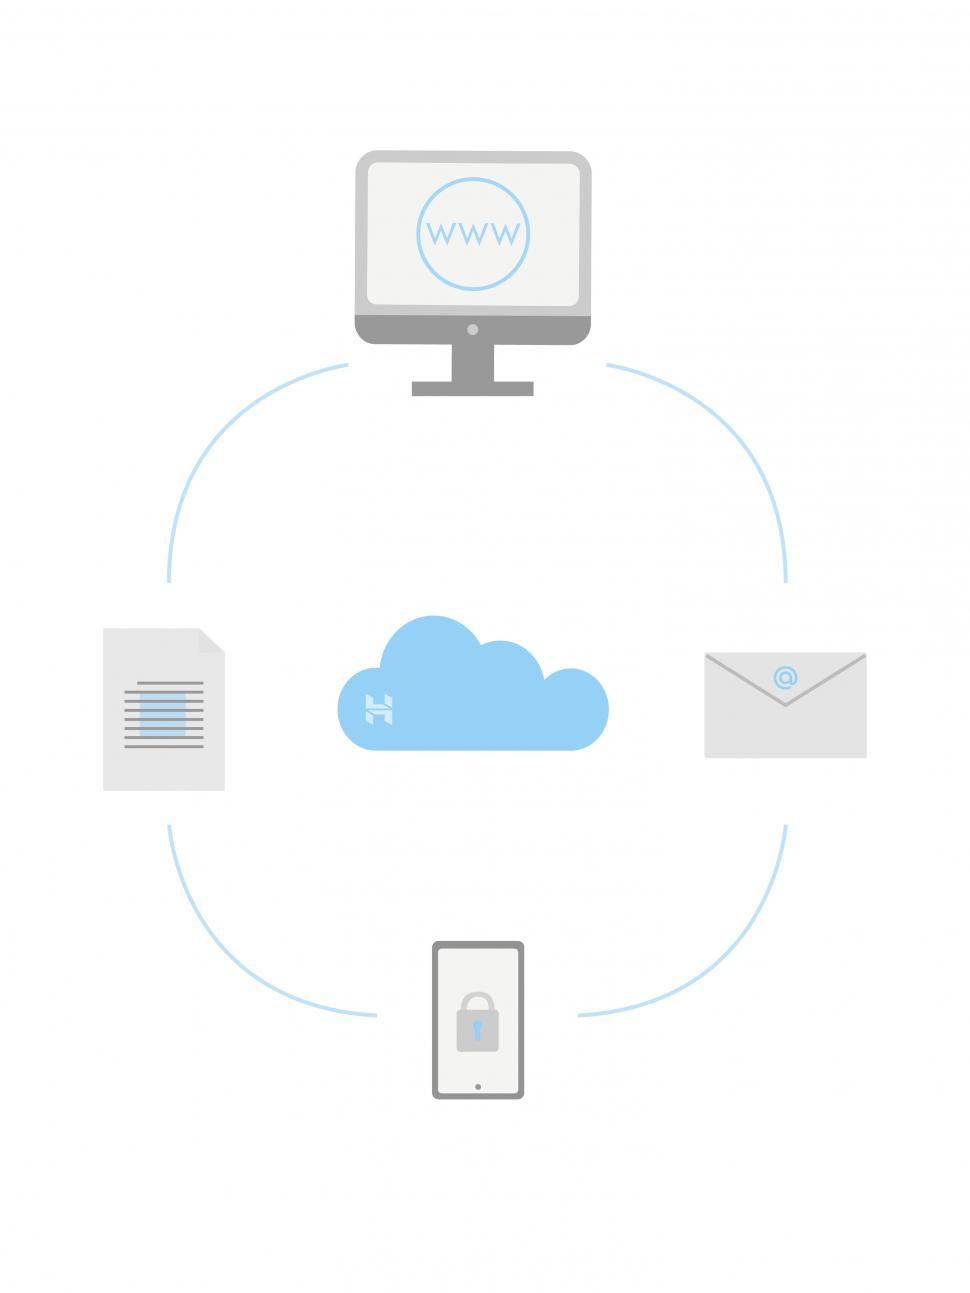 Free Image of Cloud Services Illustration  